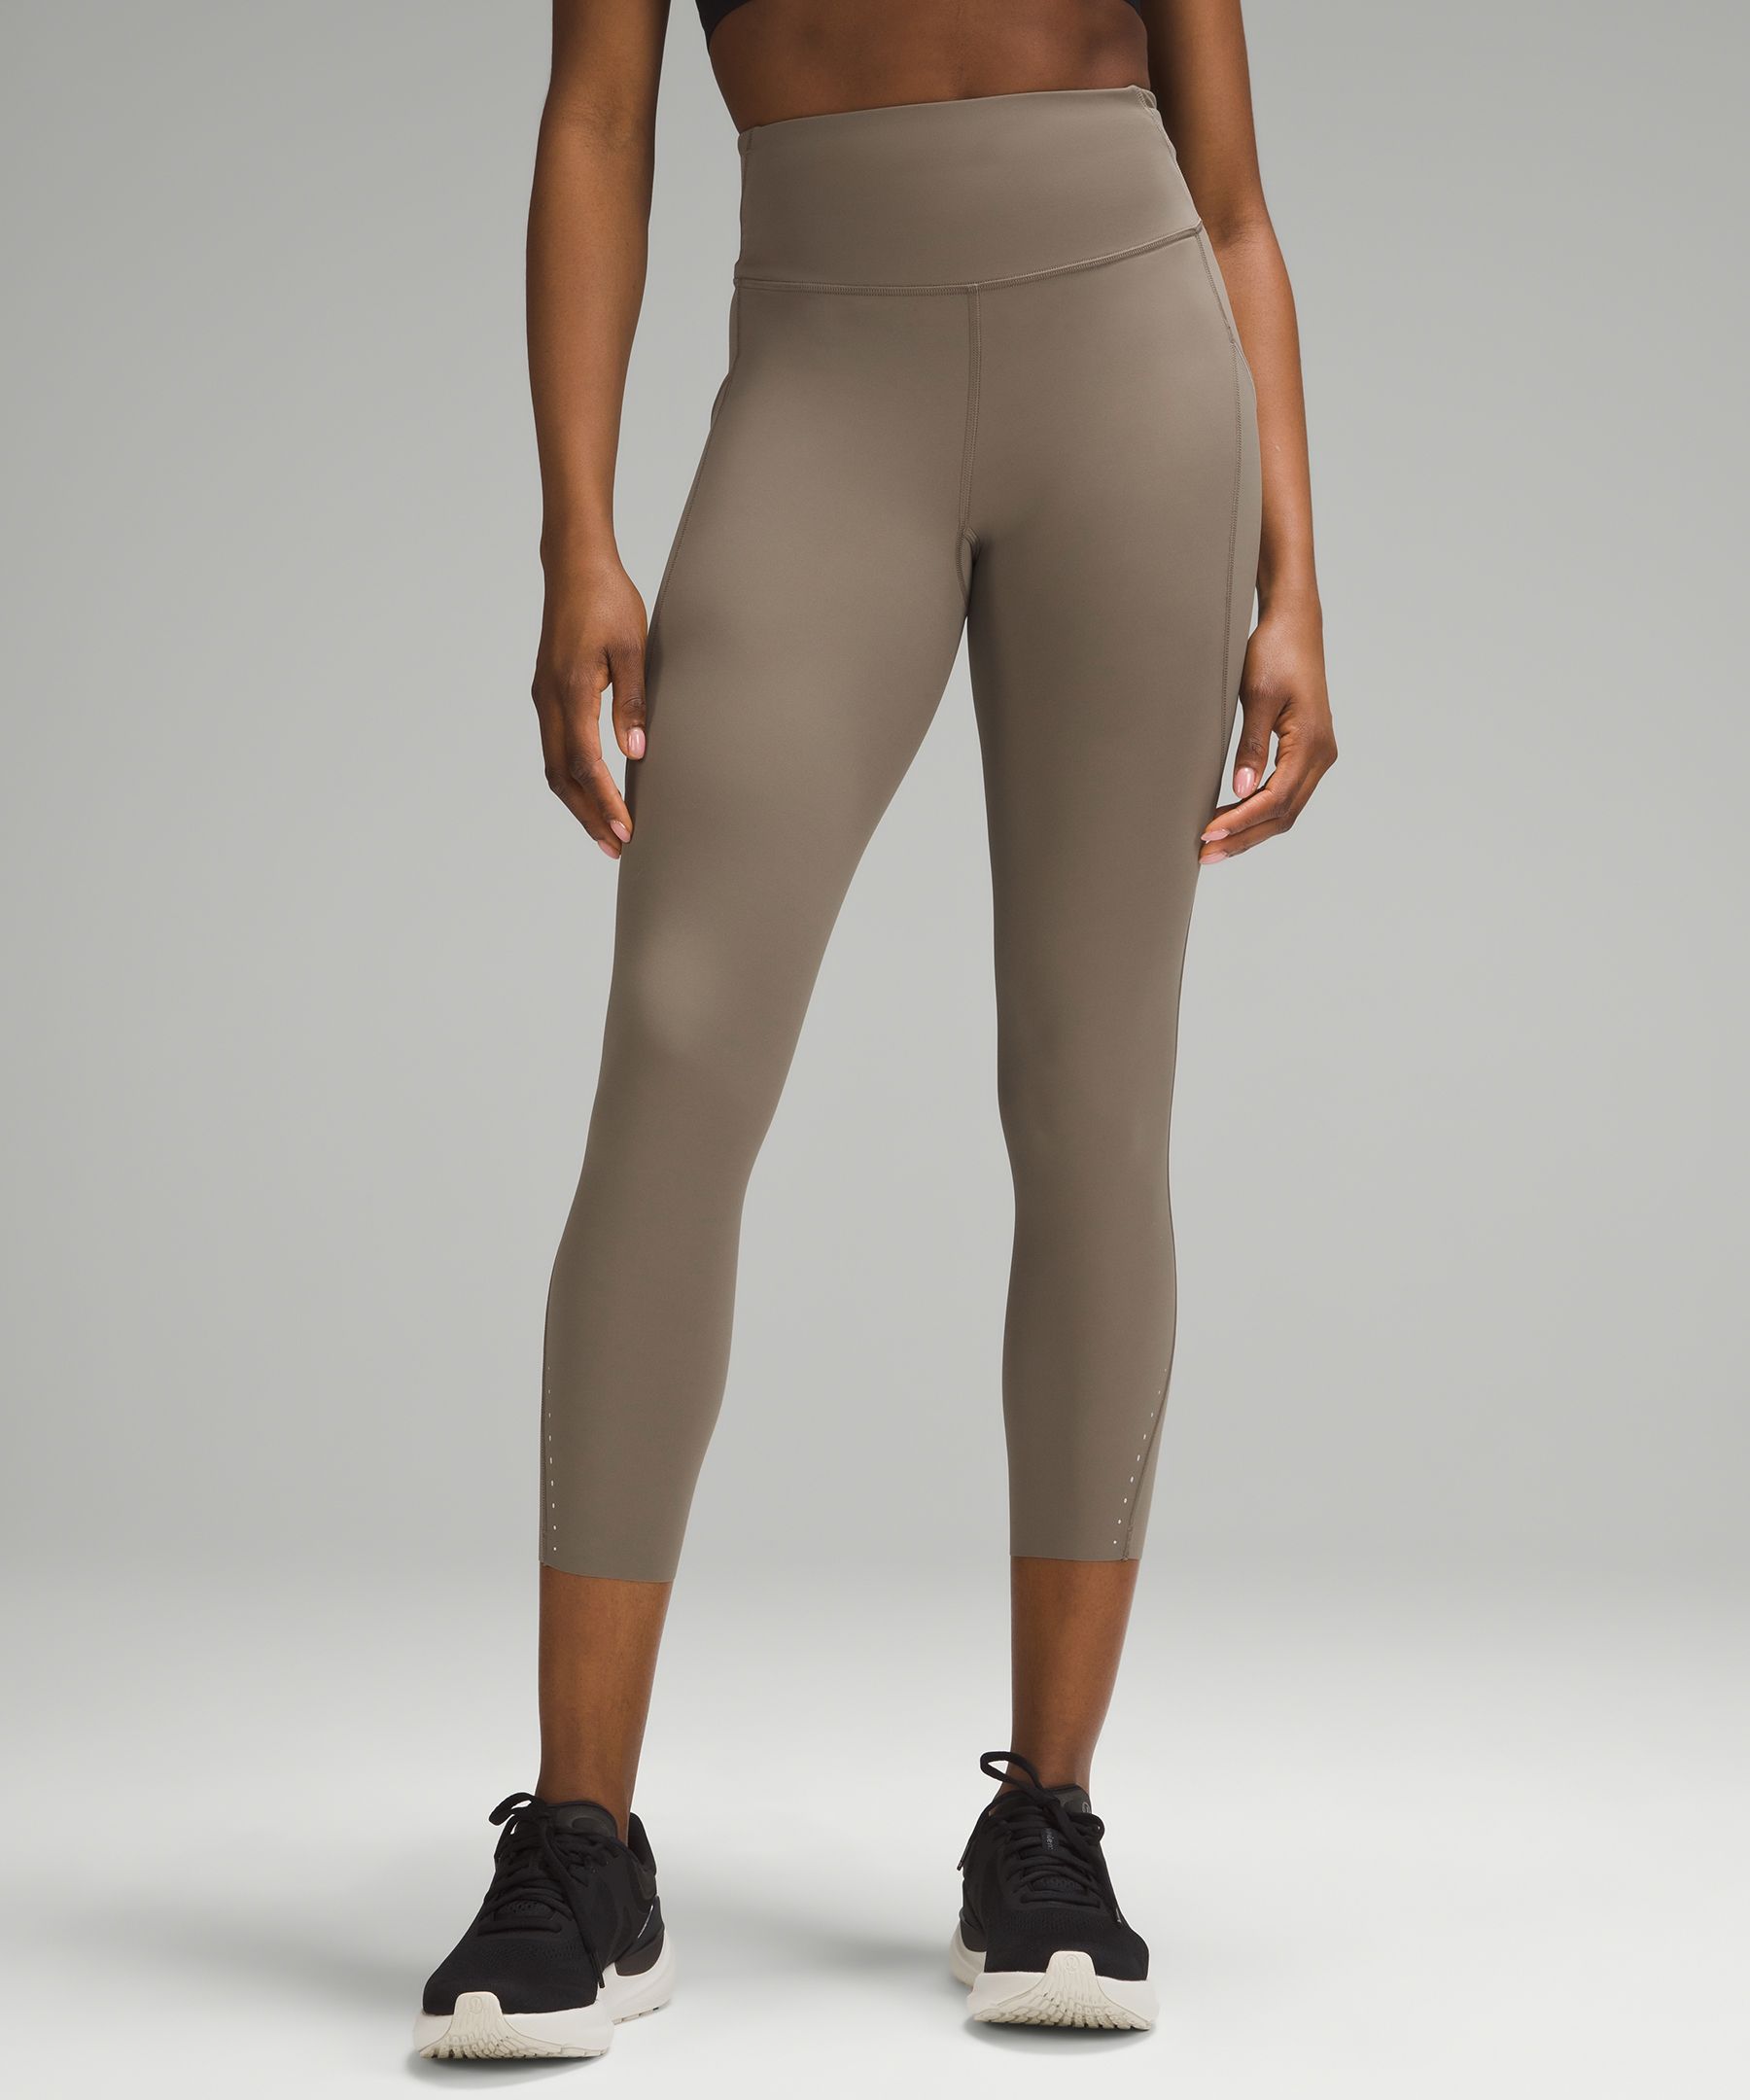 Lululemon All the Right Places High-Rise Crop 23 - Dark Olive